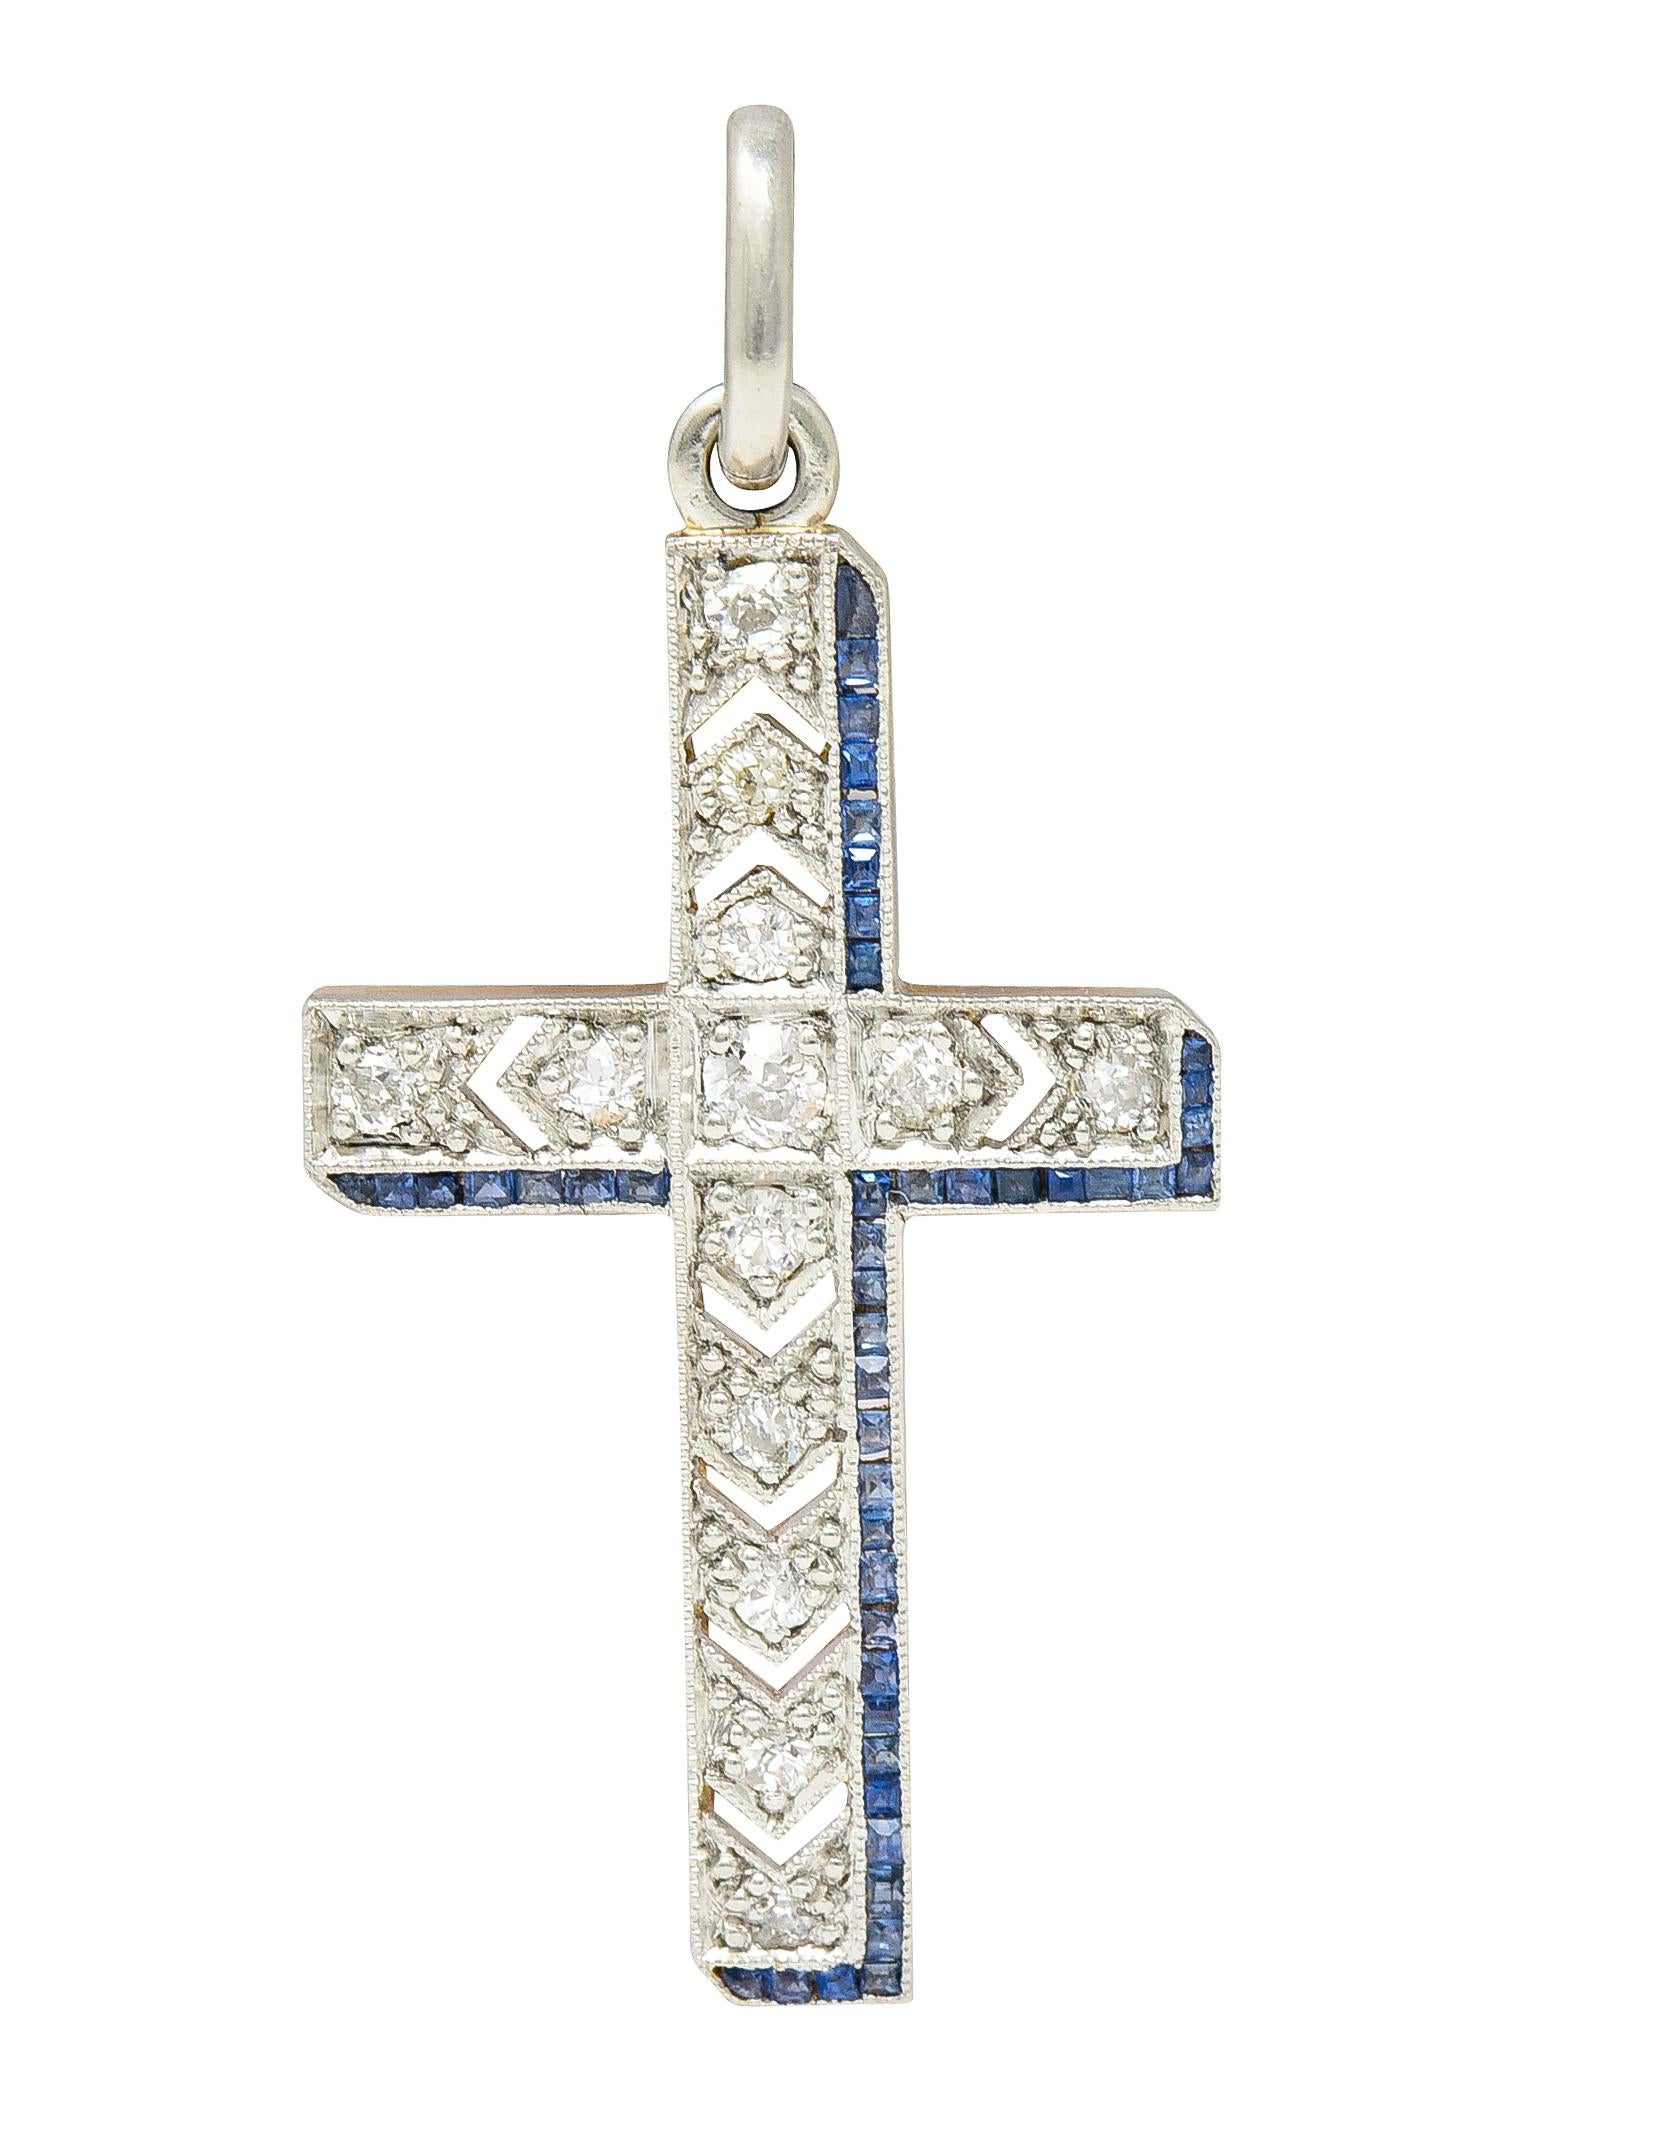 Designed as a platinum-topped cross form with old European cut diamonds bead set throughout. Weighing approximately 0.30 carat total - eye clean and bright. With square step cut sapphires channel set along edges. Weighing approximately 0.45 carat